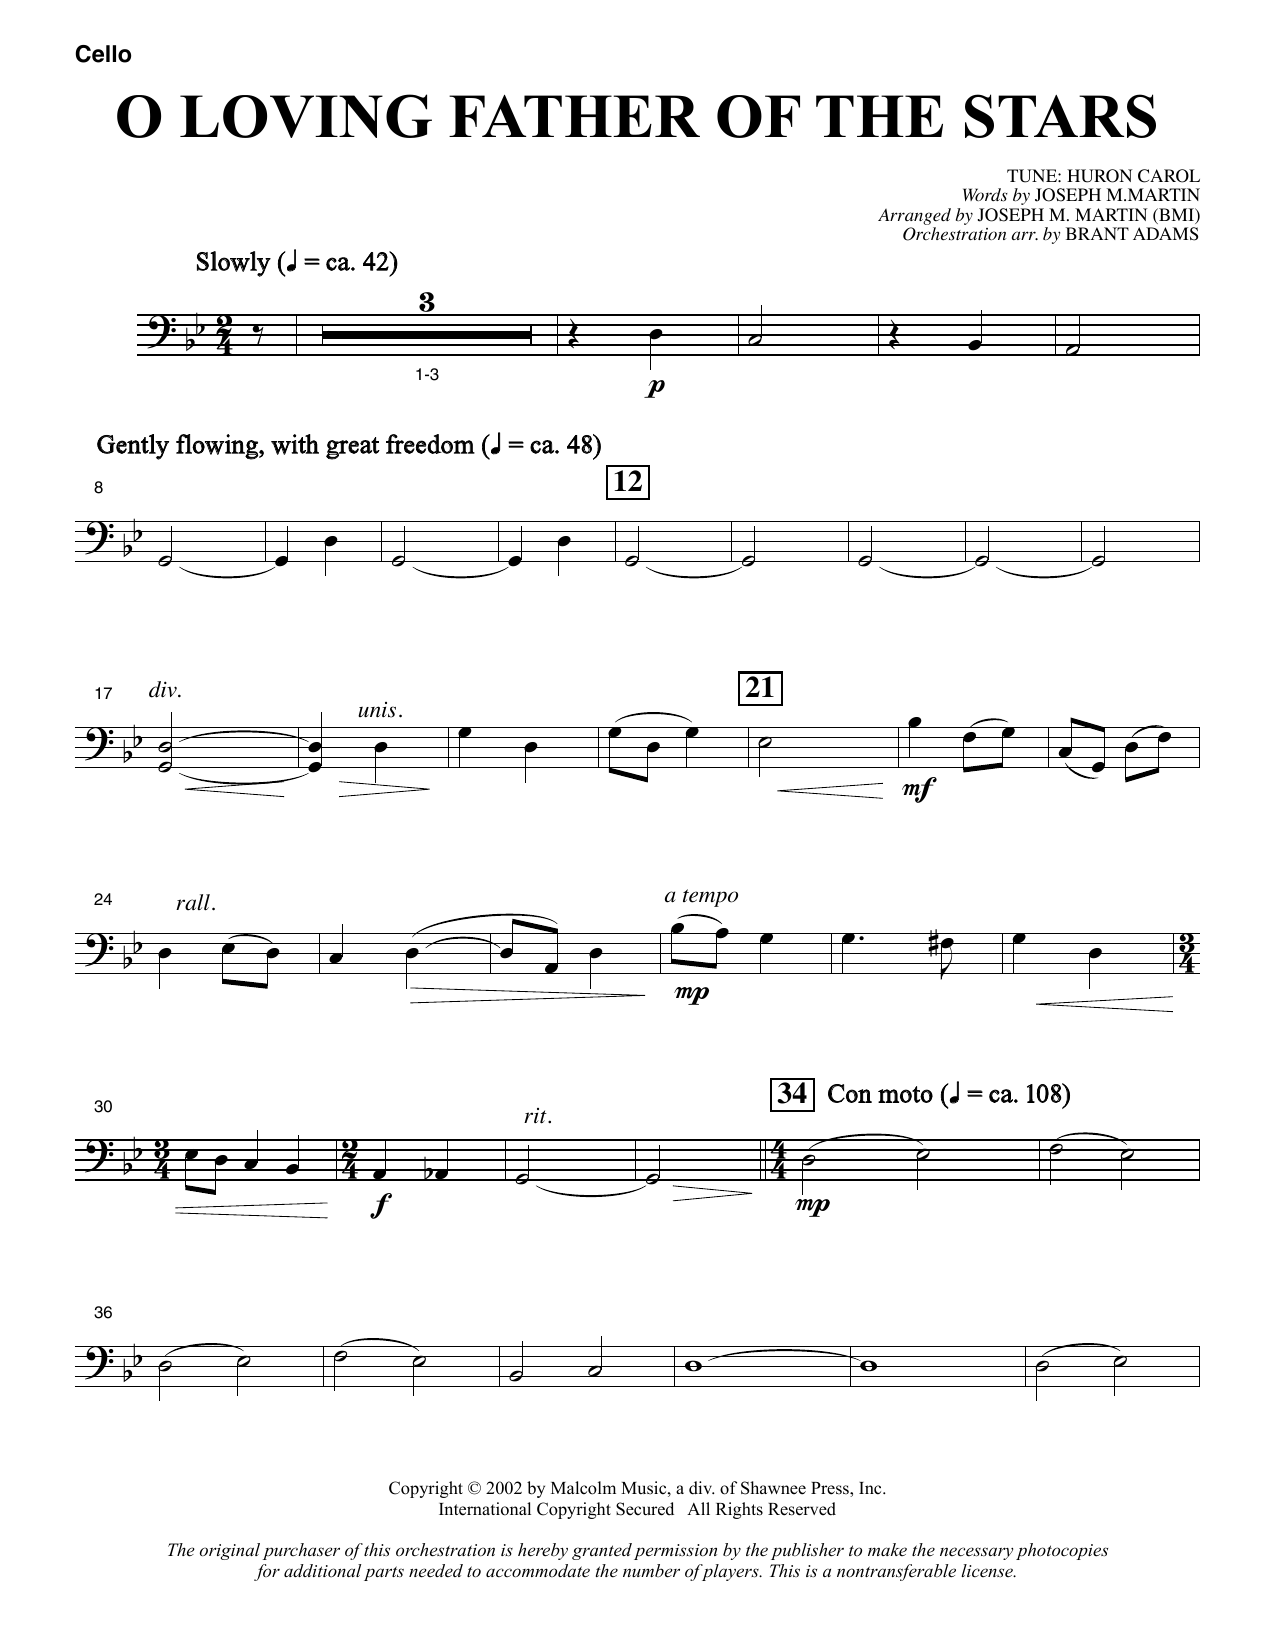 Joseph M. Martin O Loving Father Of The Stars (from Morning Star) - Cello sheet music notes and chords. Download Printable PDF.